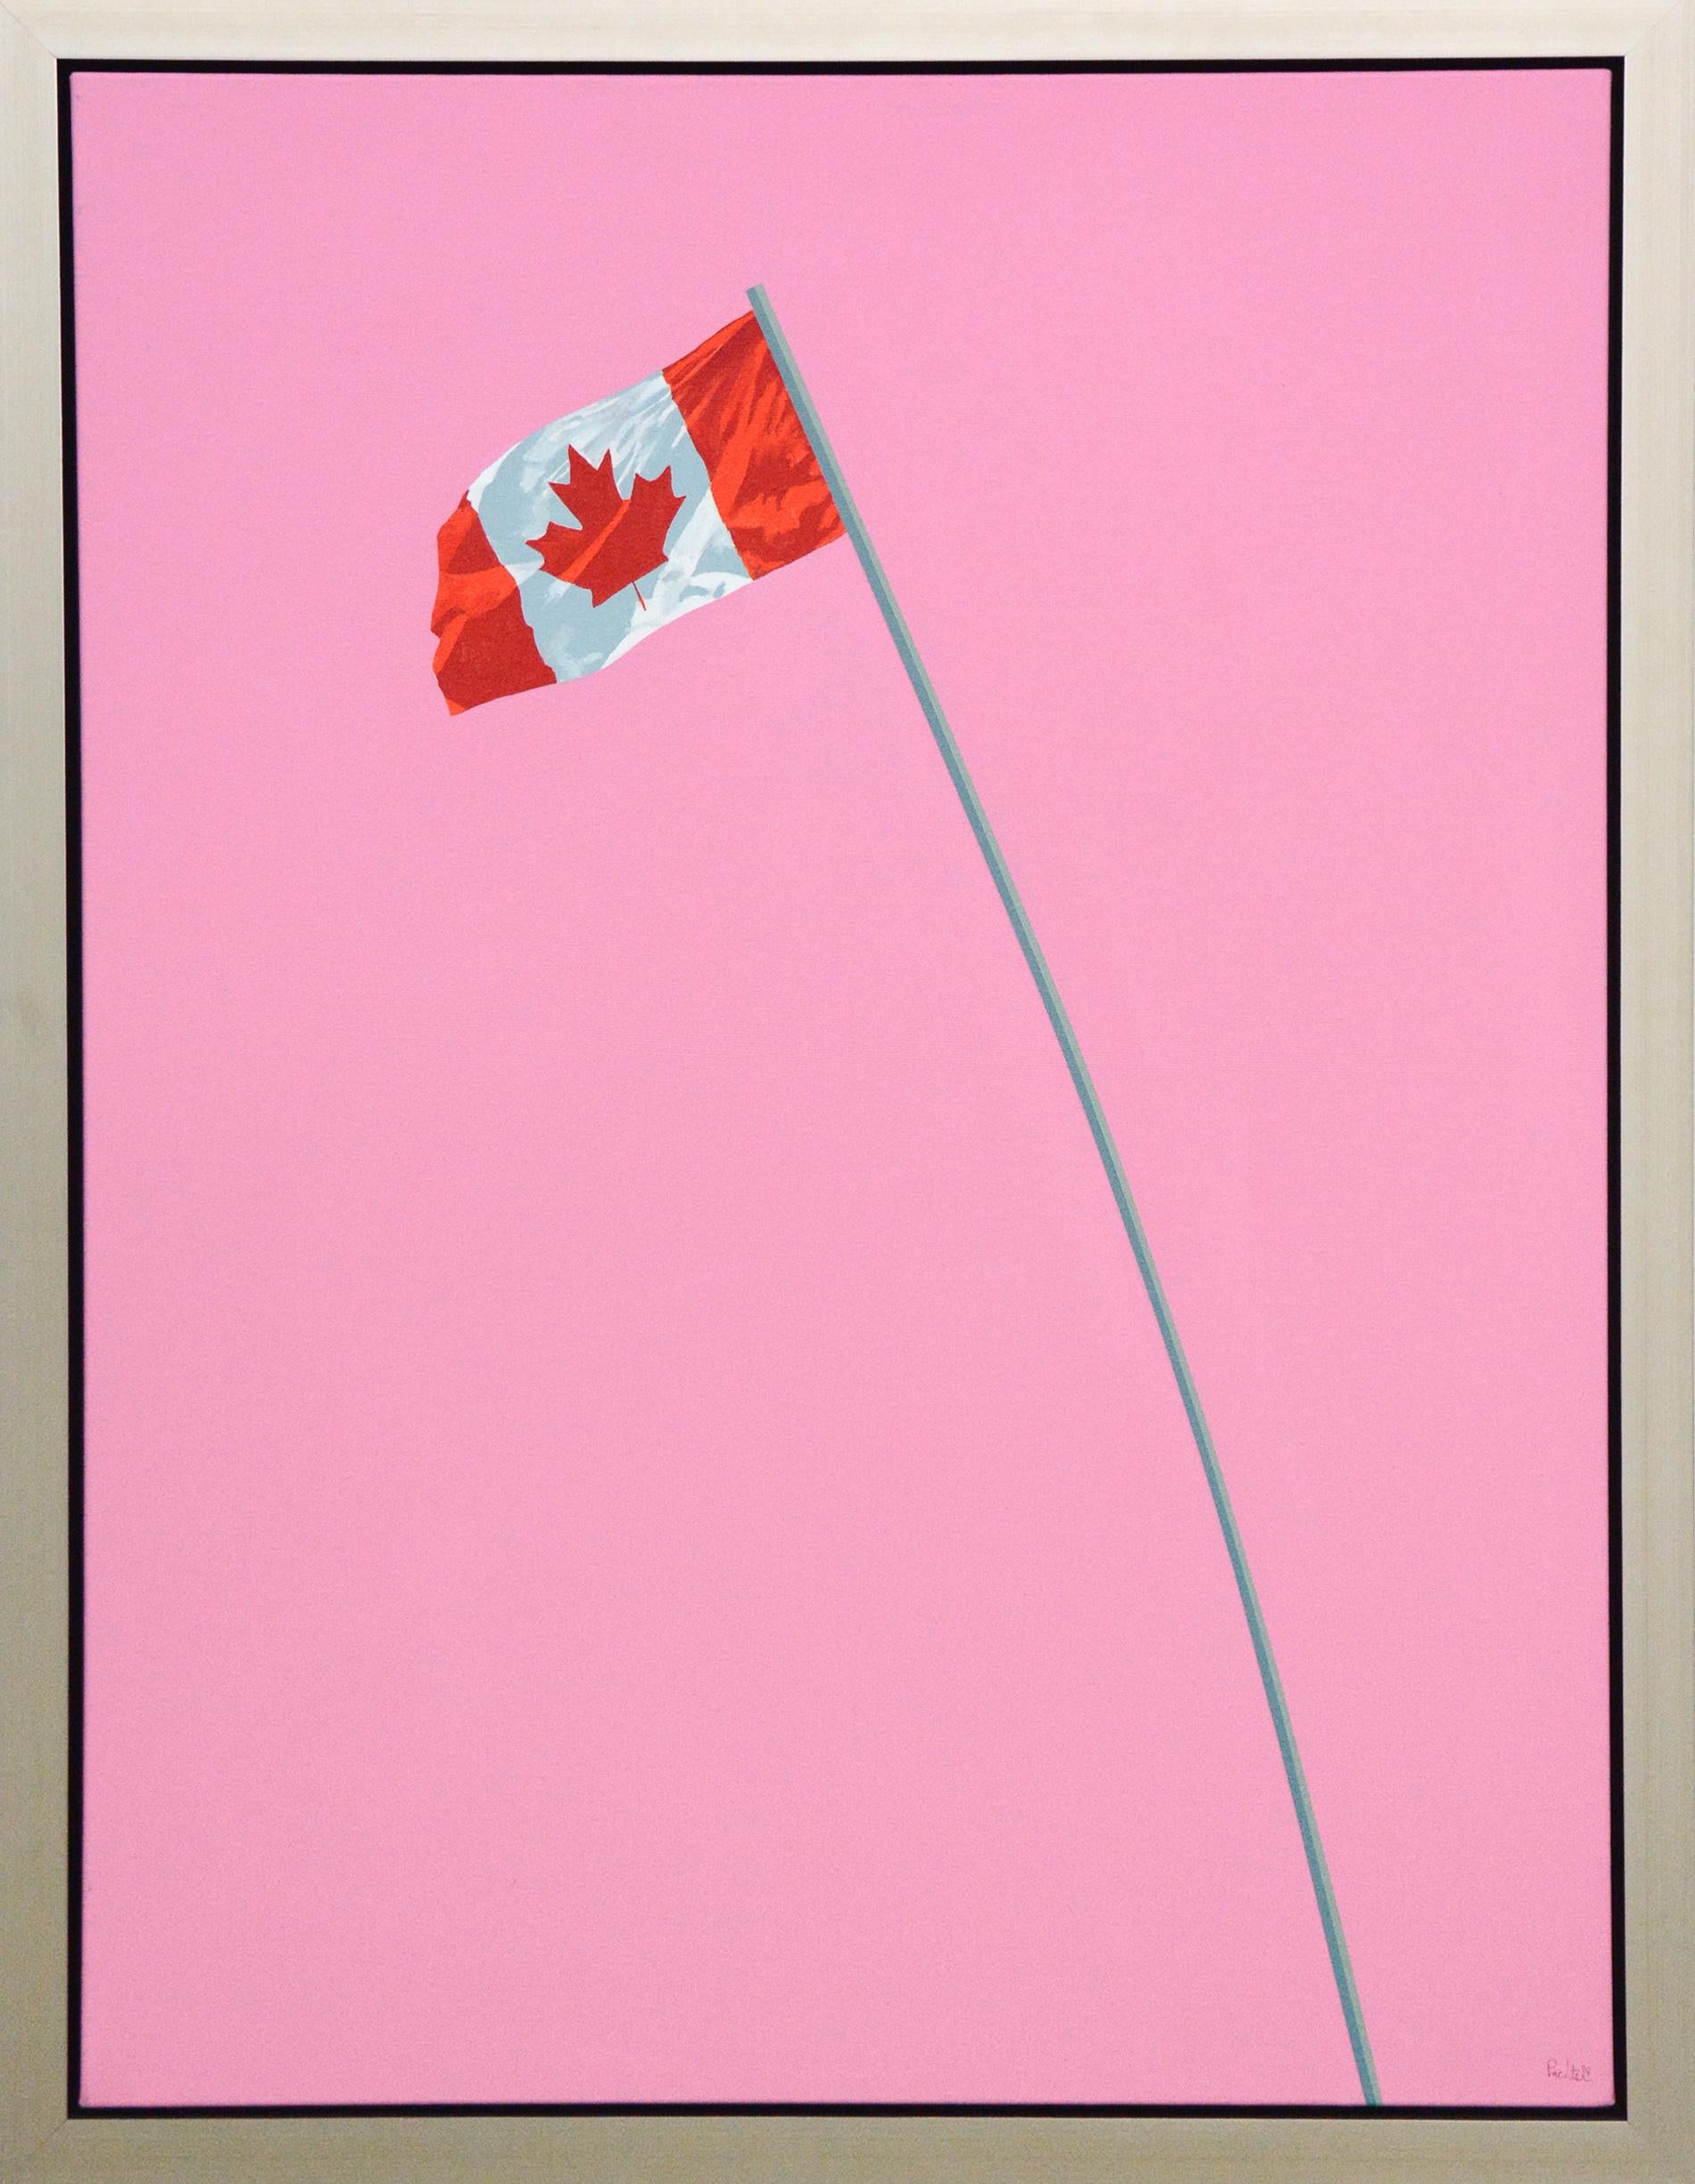 Charles Pachter Figurative Painting - Pink Flag - bright, pop-art, Canadiana, figurative, acrylic on canvas